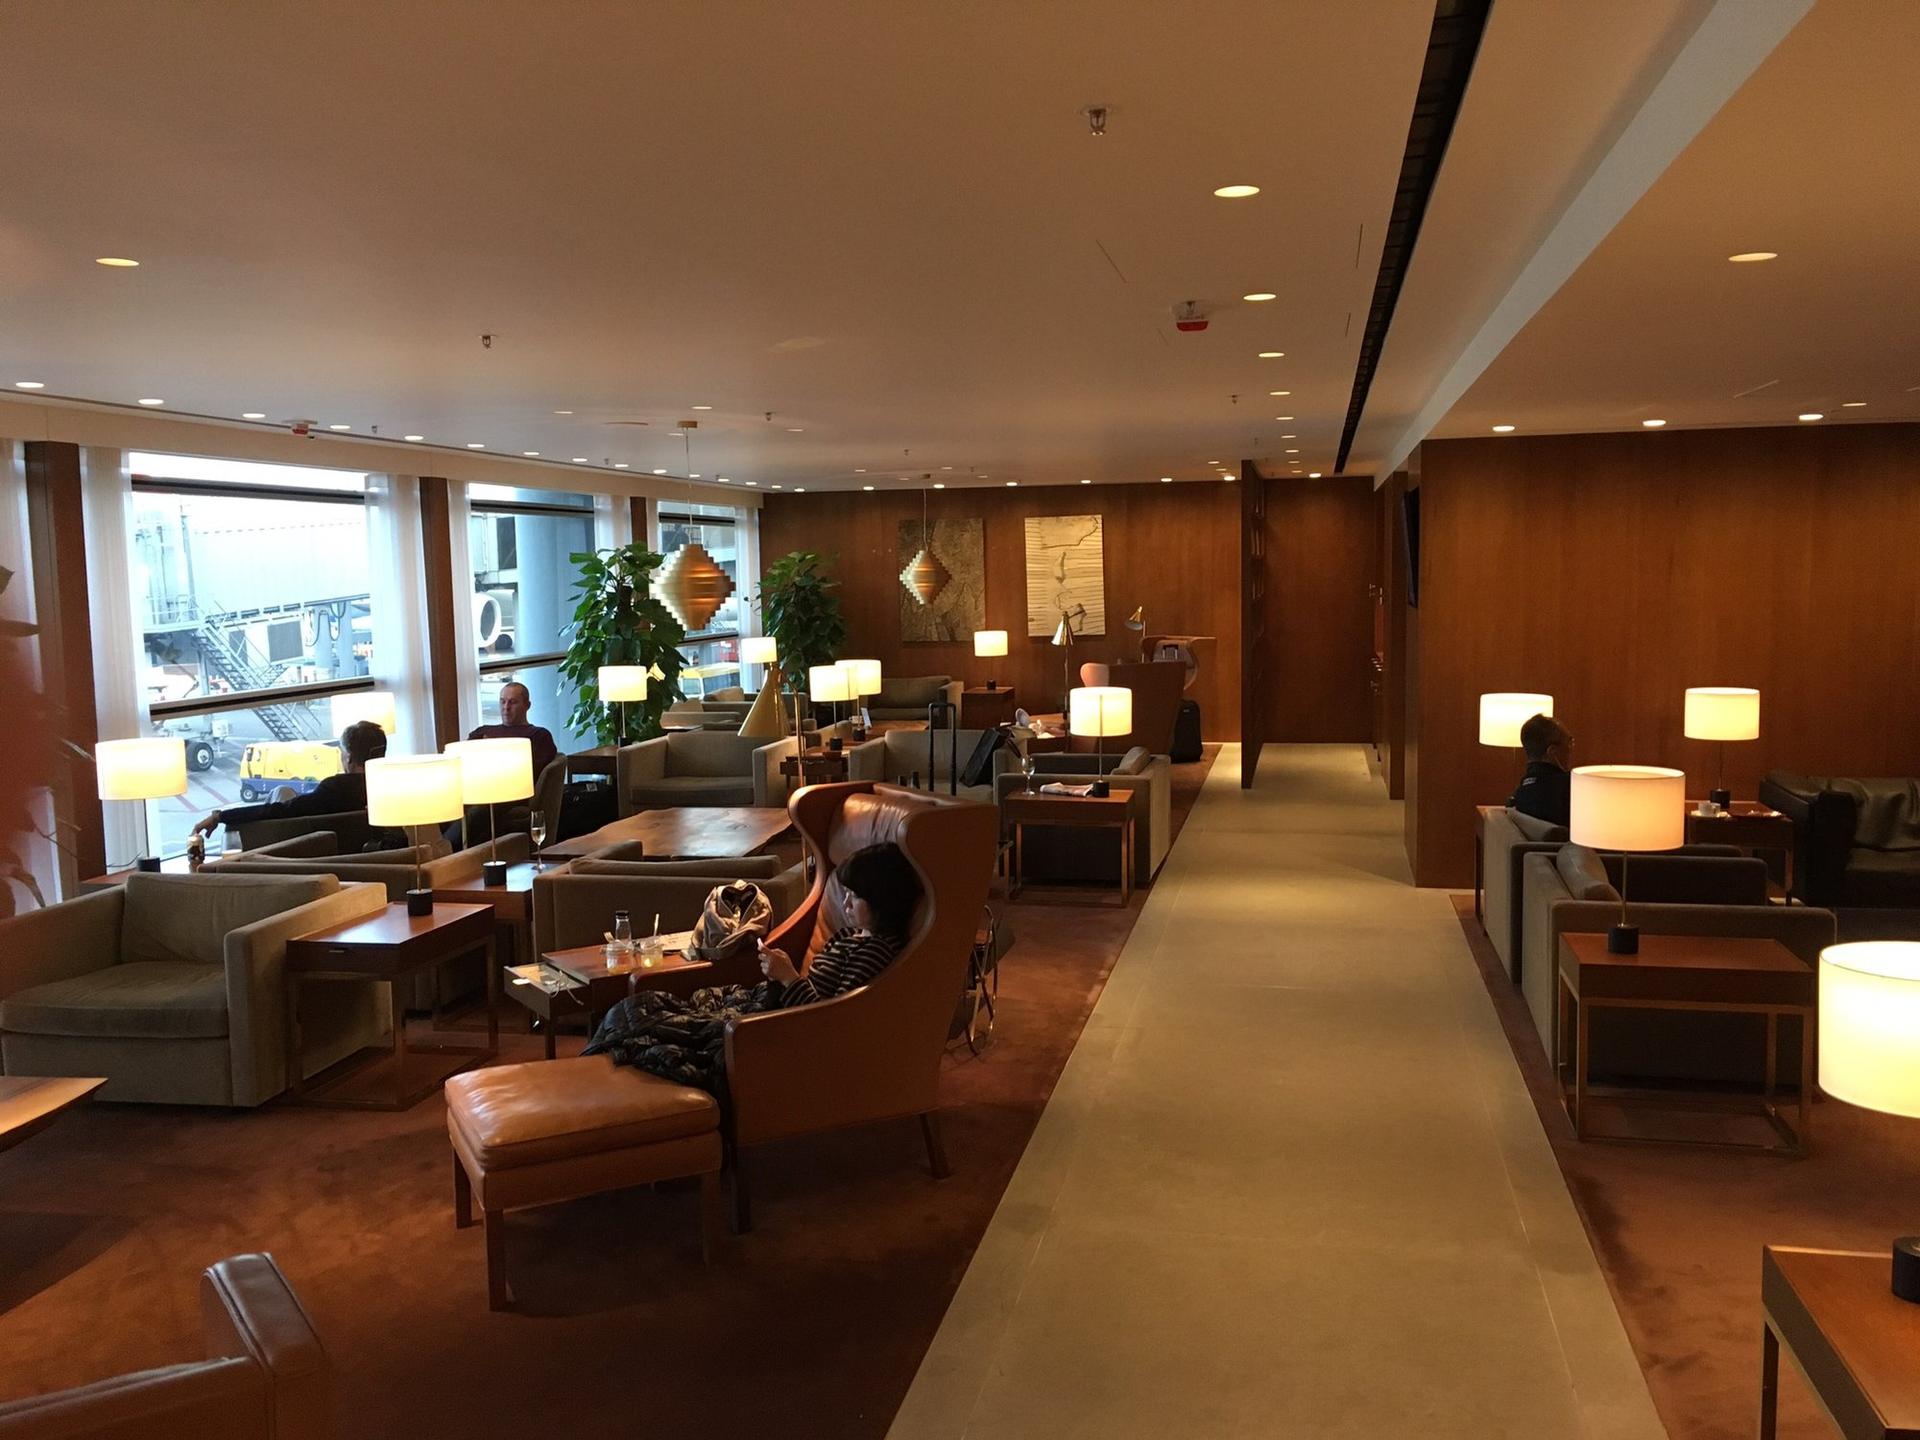 Cathay Pacific The Pier First Class Lounge image 61 of 100